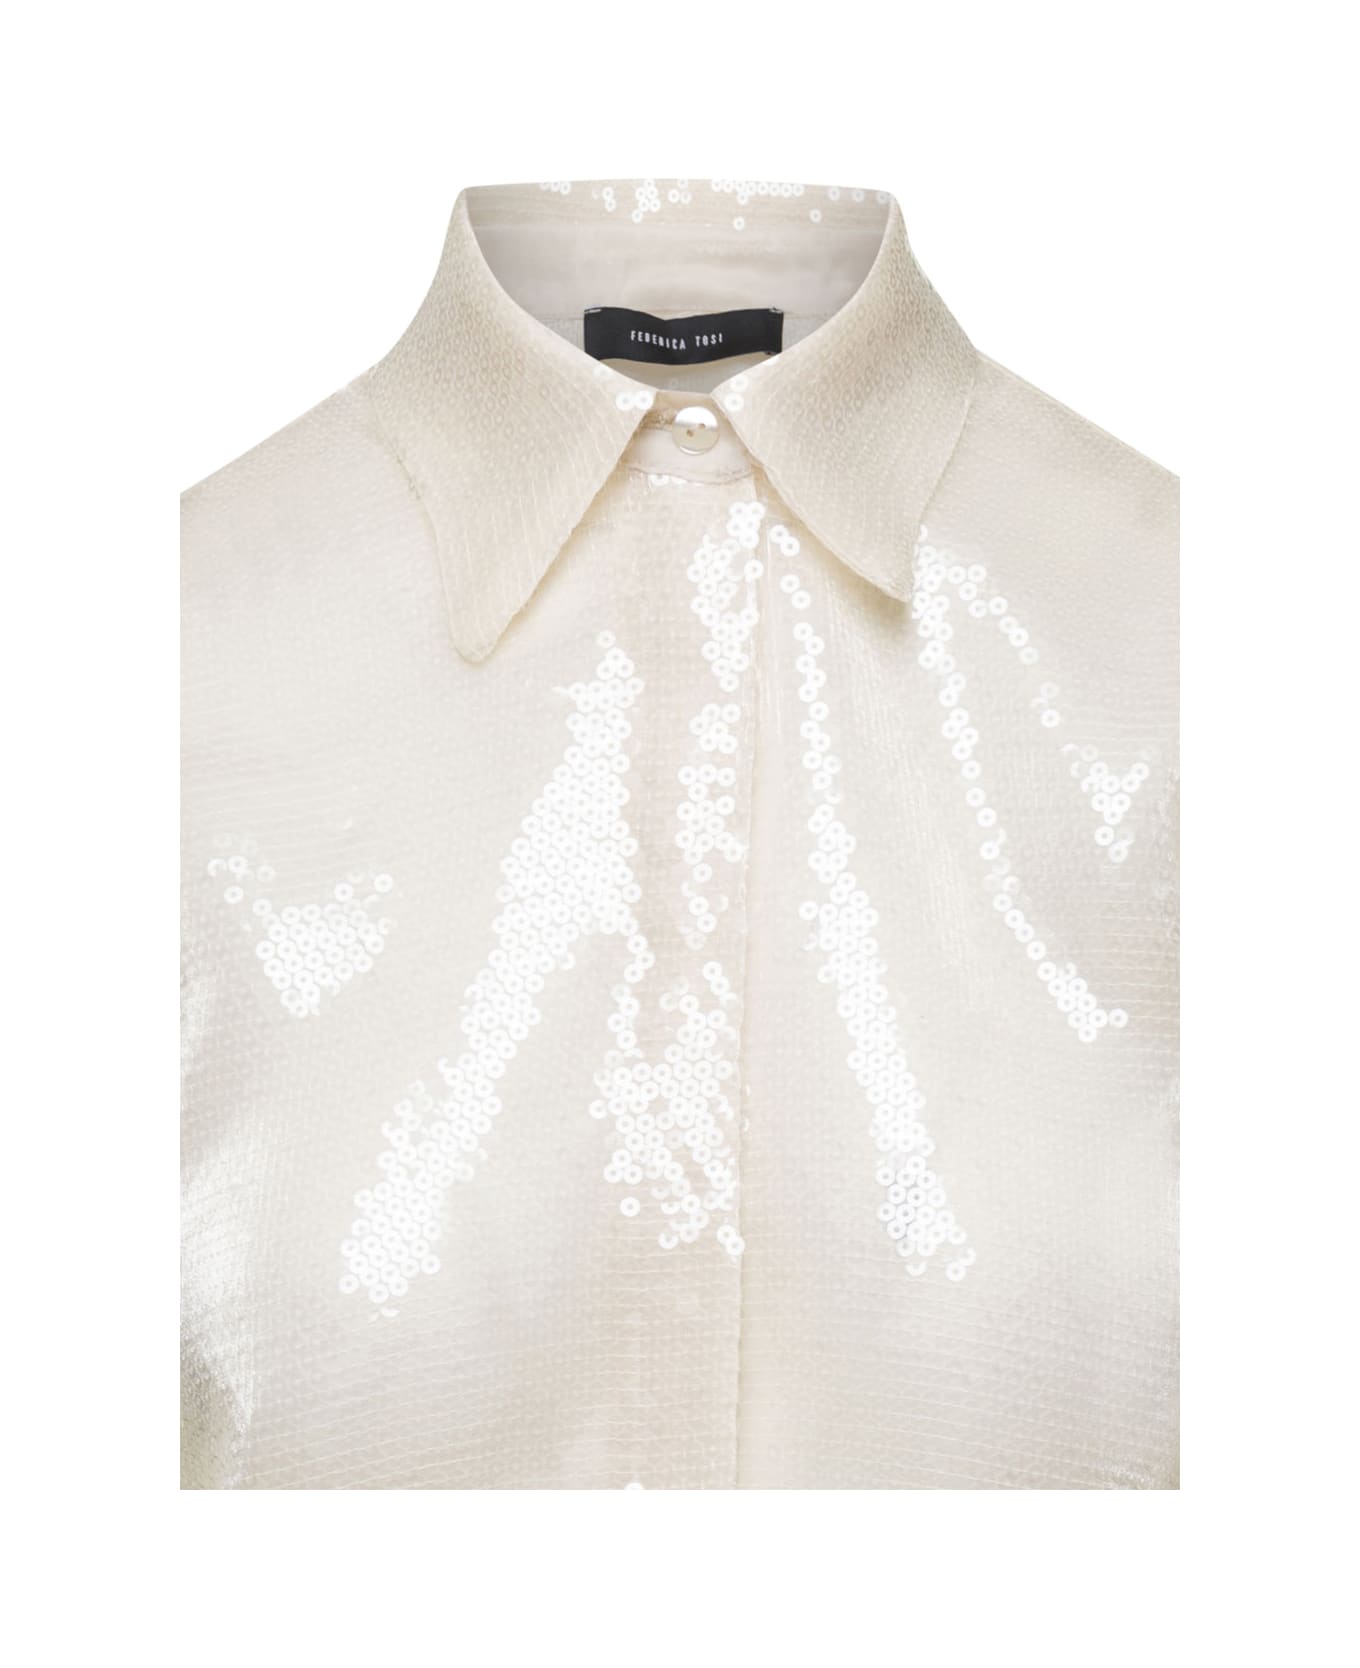 Federica Tosi Cream Shirt With Sequins All Over In Techno Fabric Woman - White